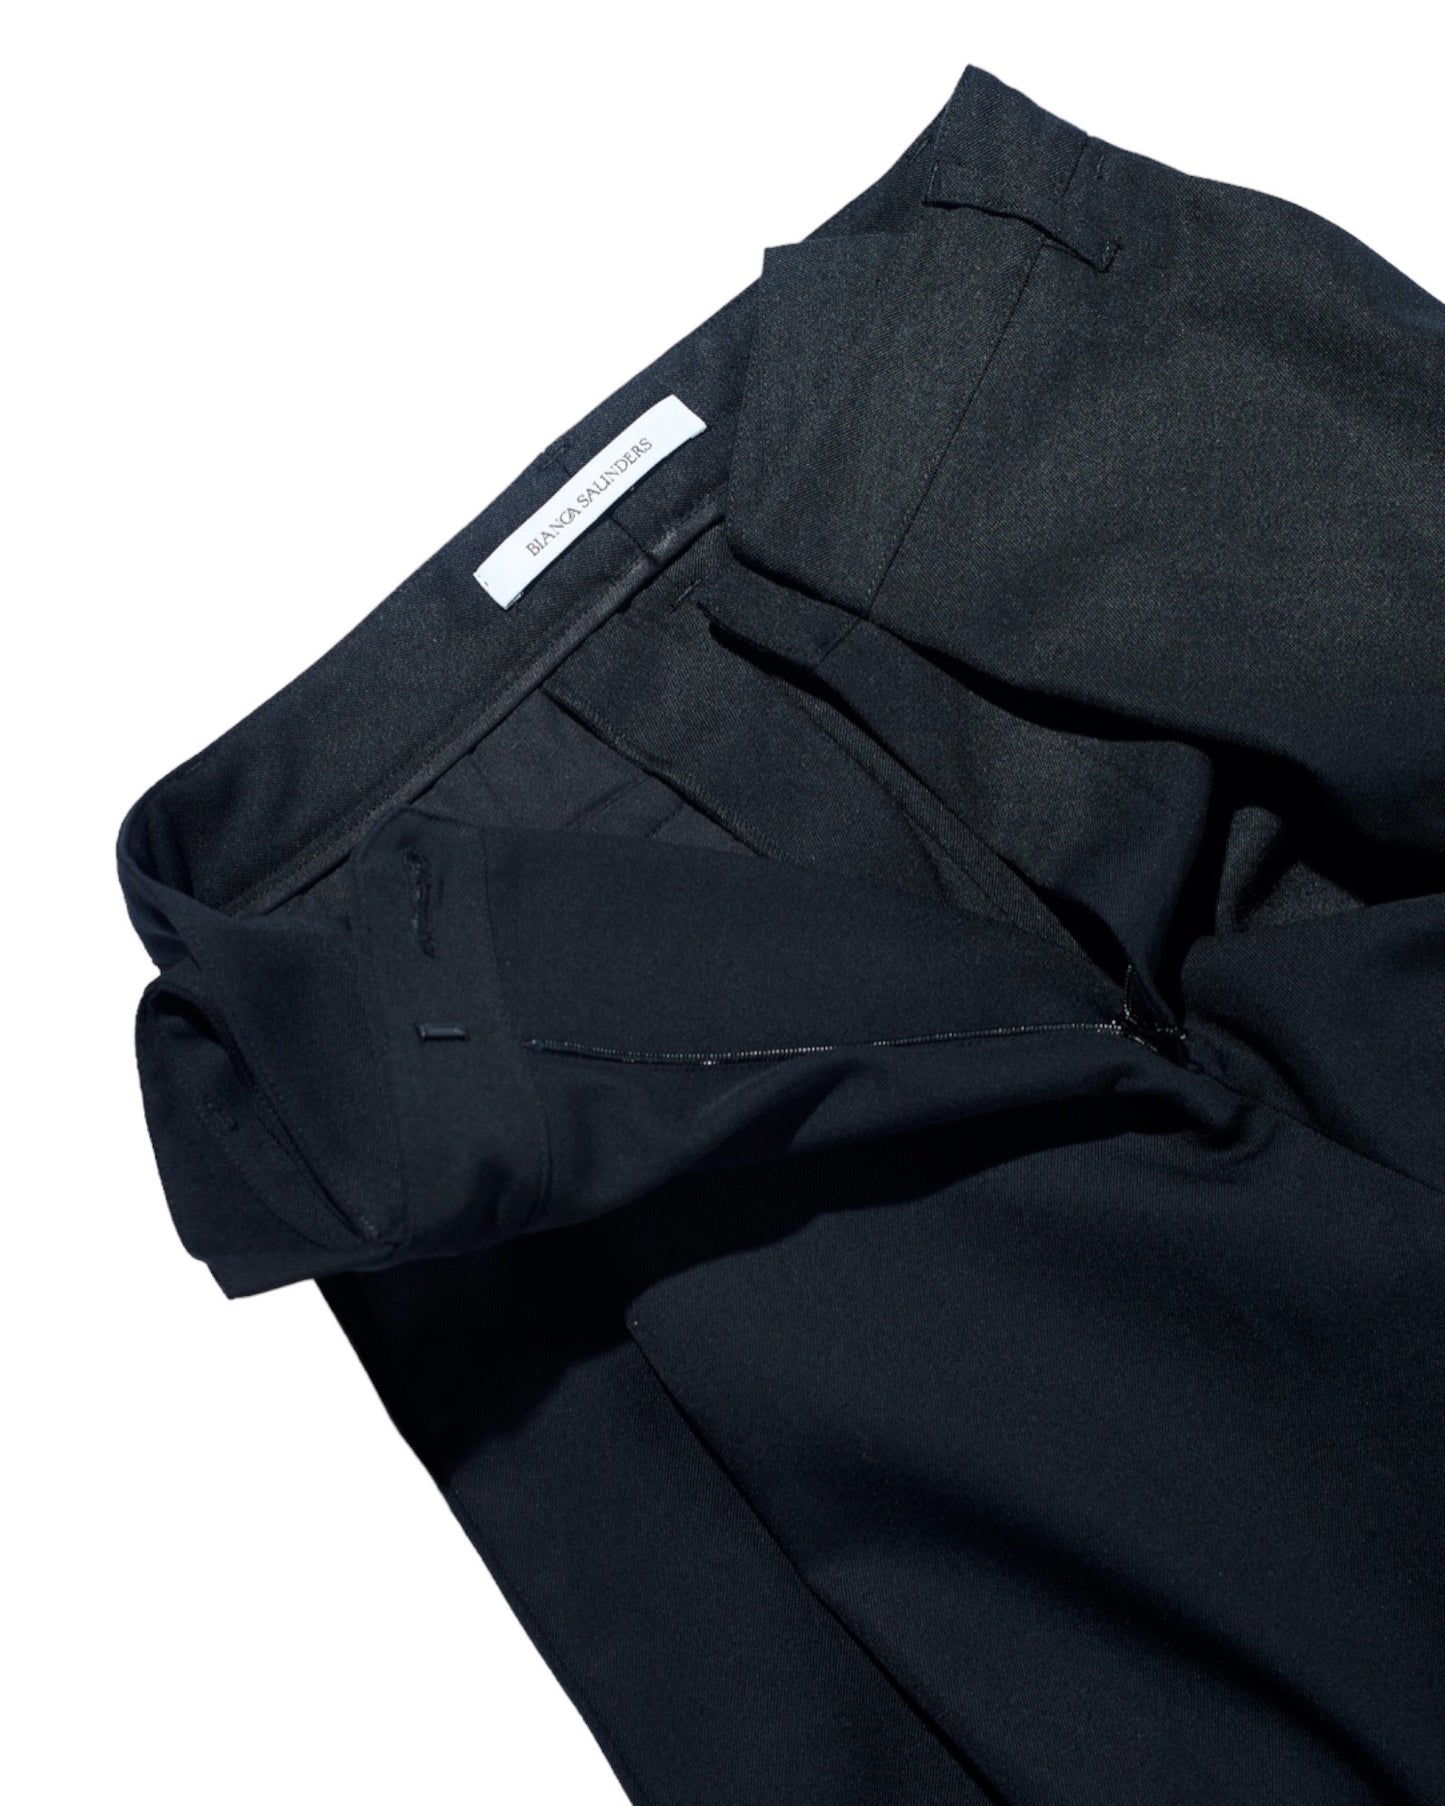 Black Shift Tailored Trousers